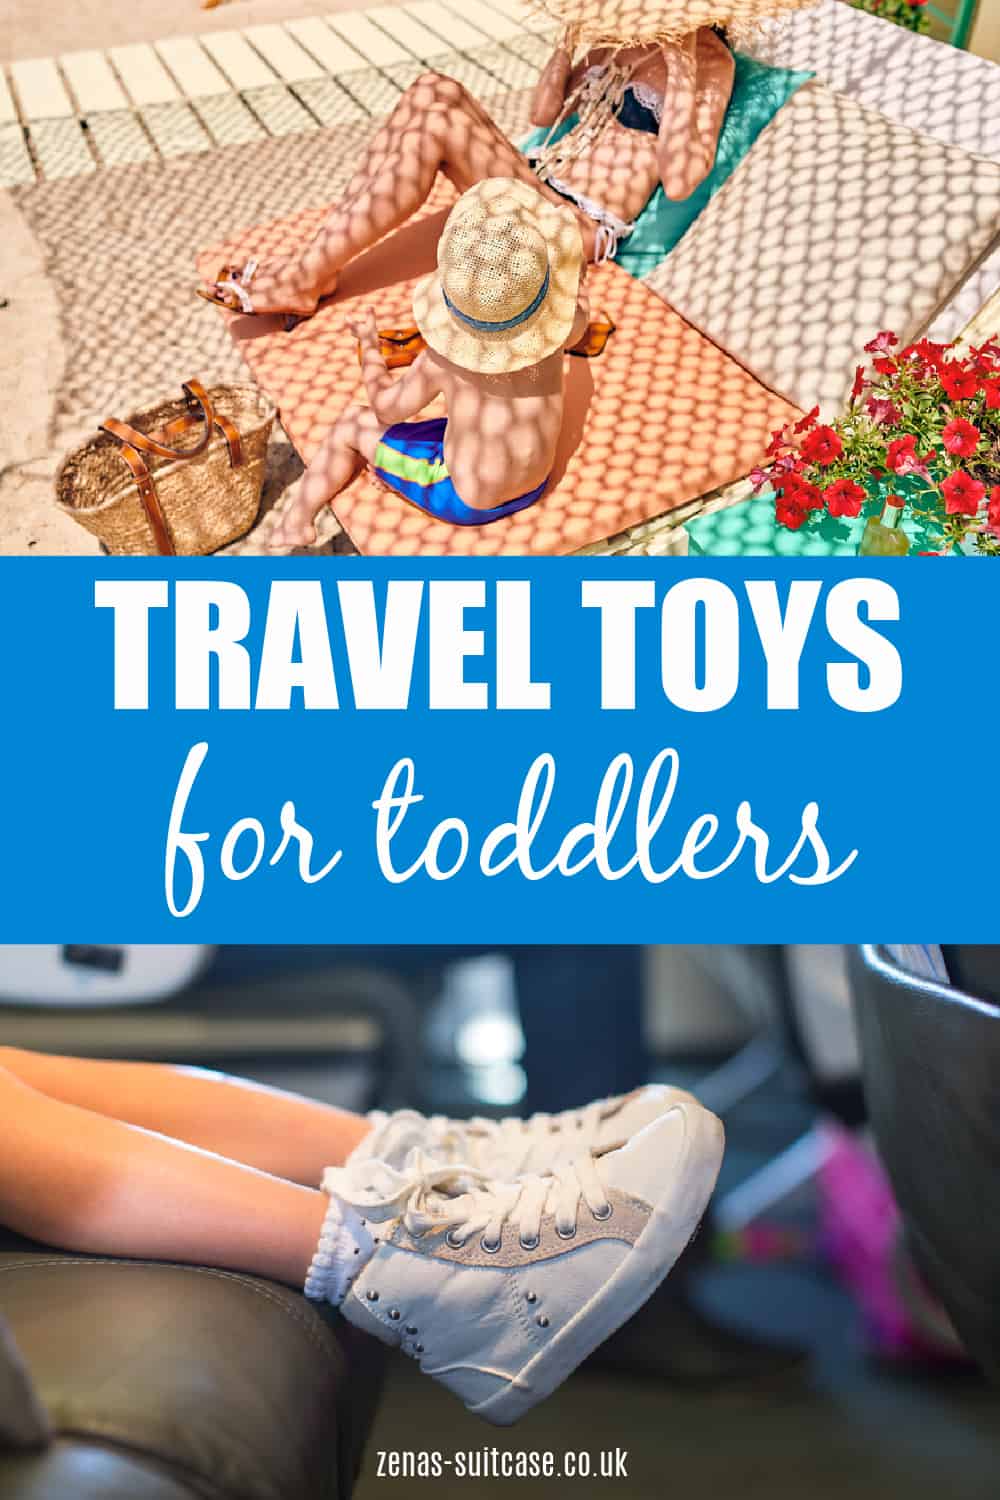 The best toddler toys for travel. Pin now to get the top rated toys to entertain your child